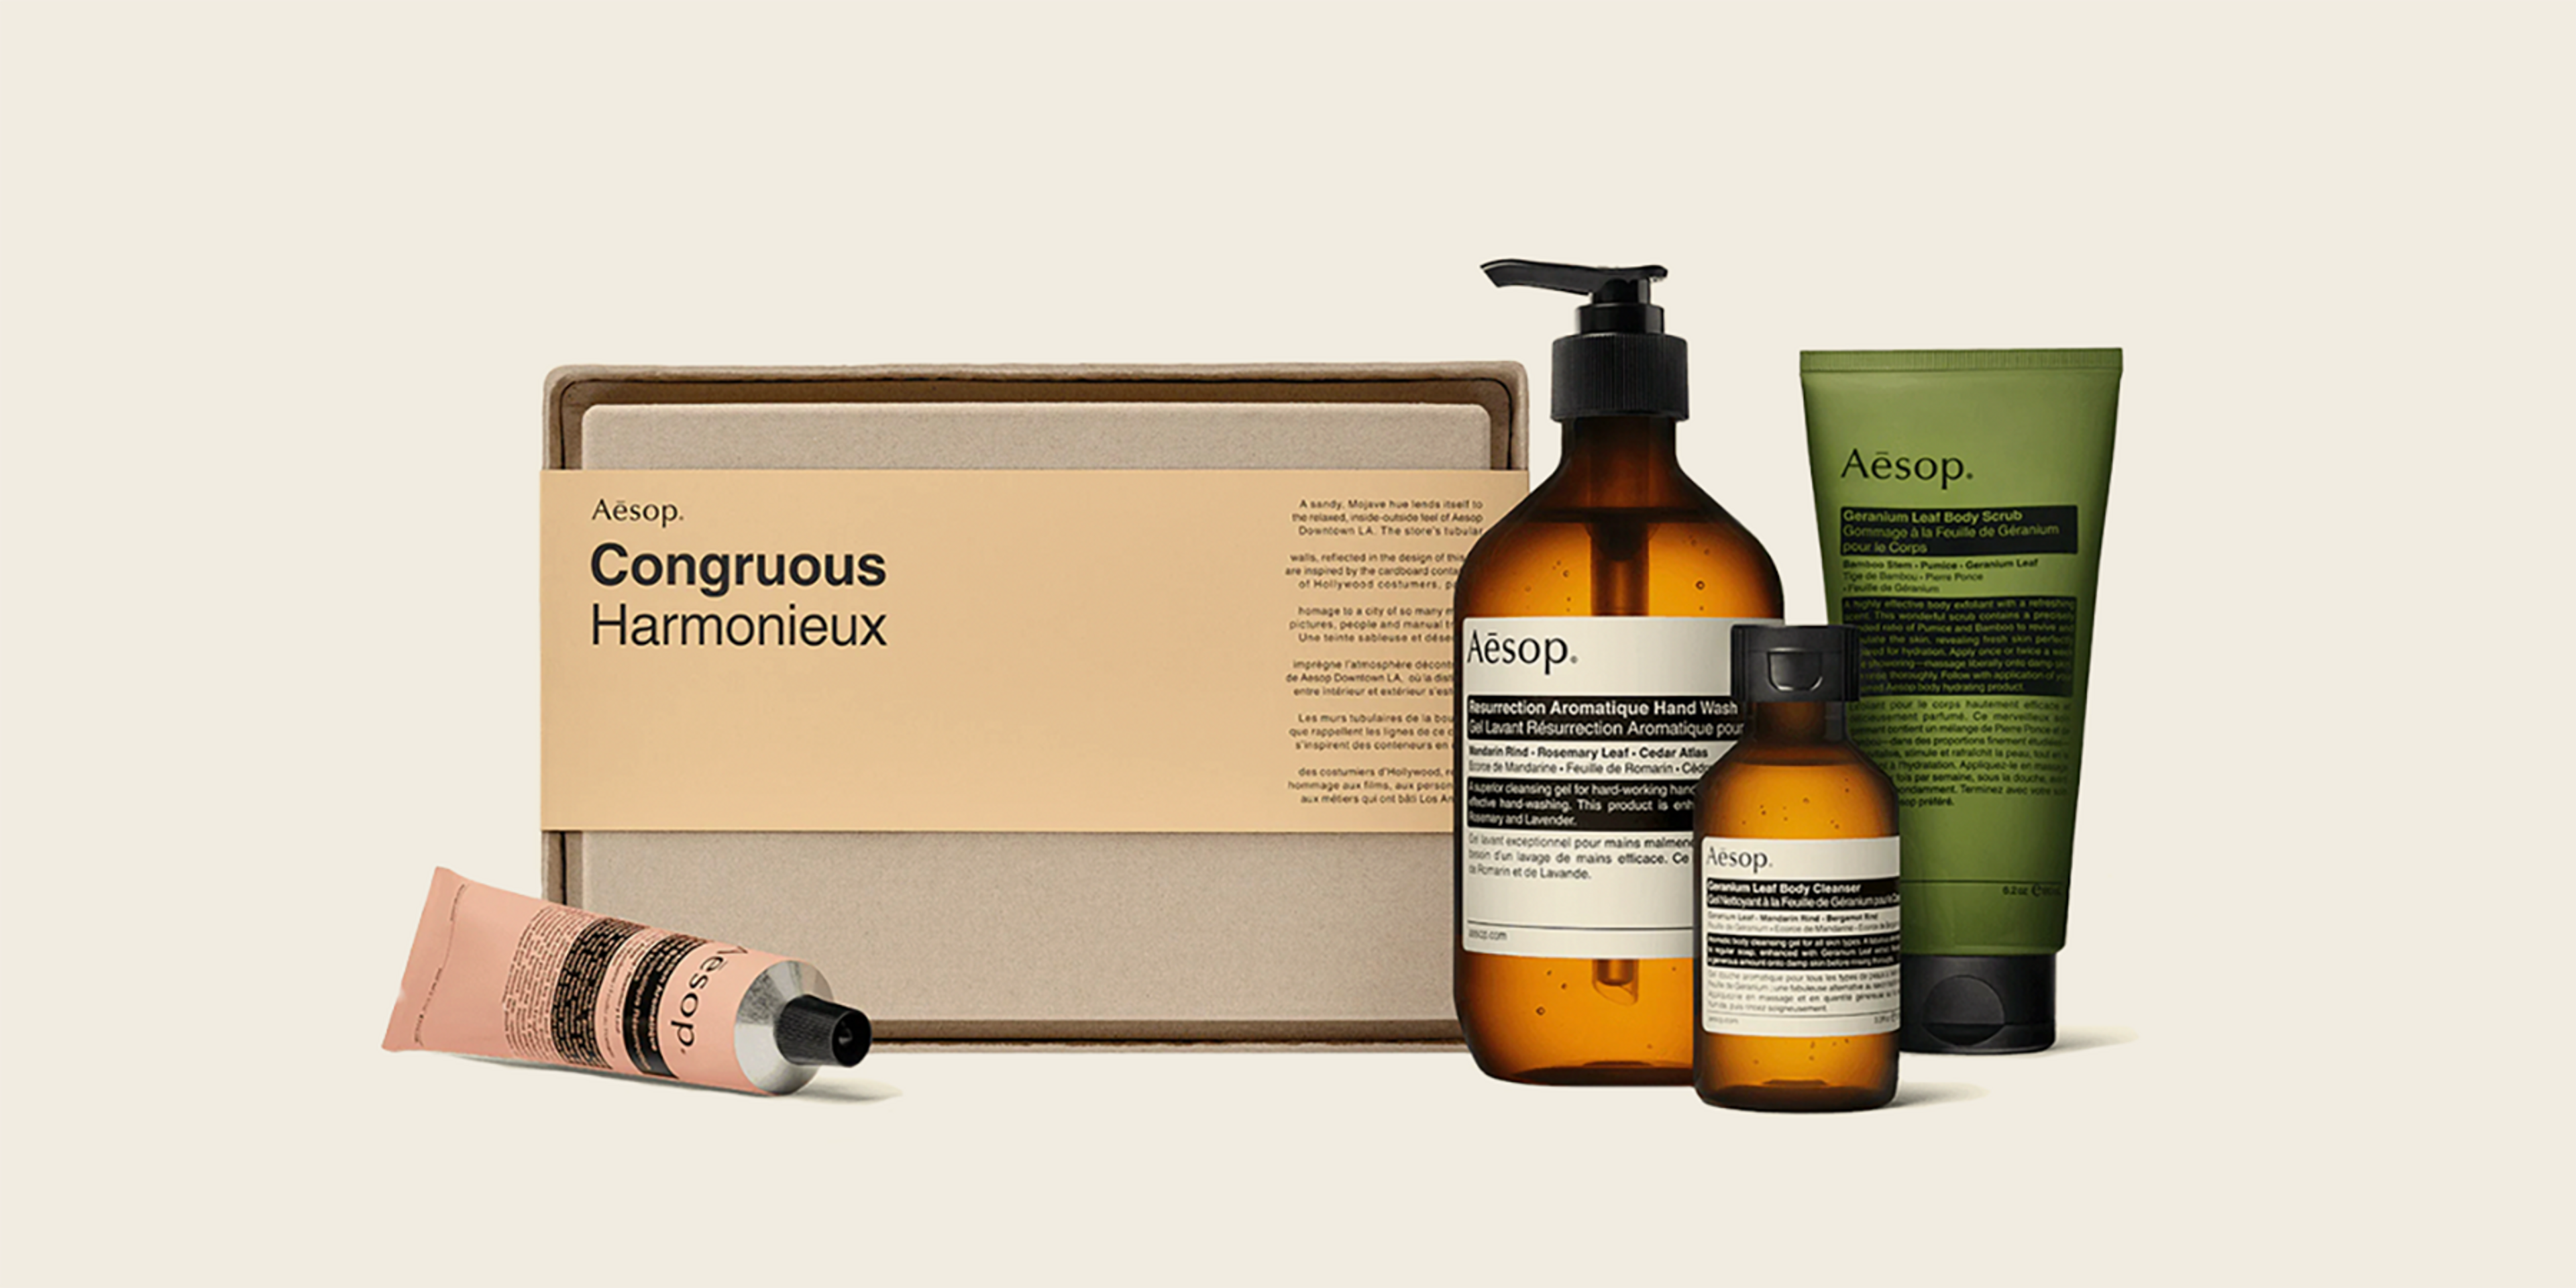 Hand and body products from Aesop with packaging